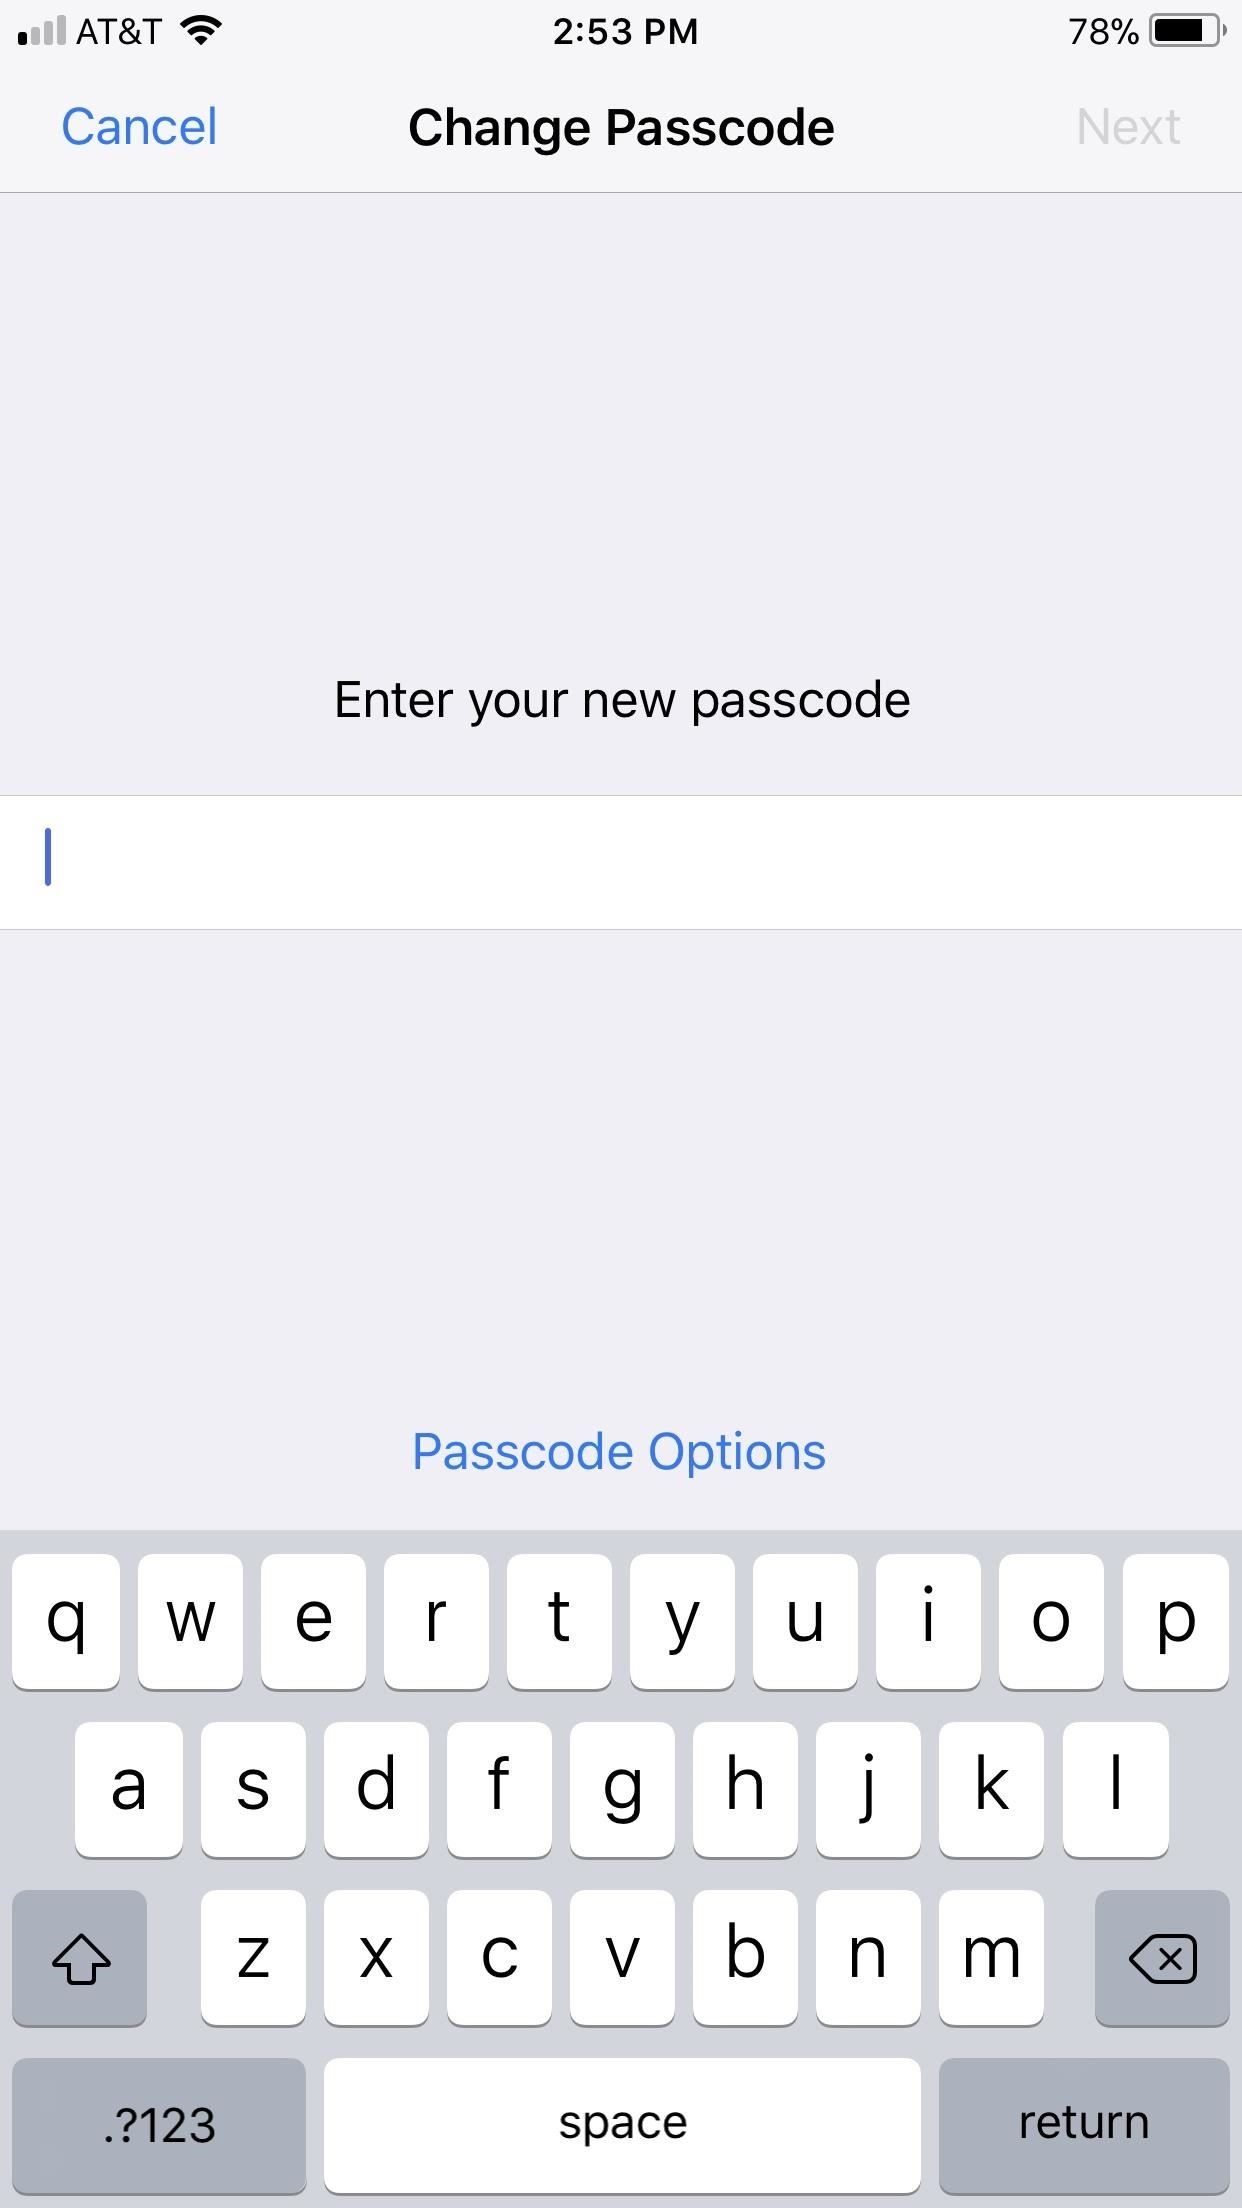 24 iOS 11 Privacy & Security Settings You Should Check Right Now